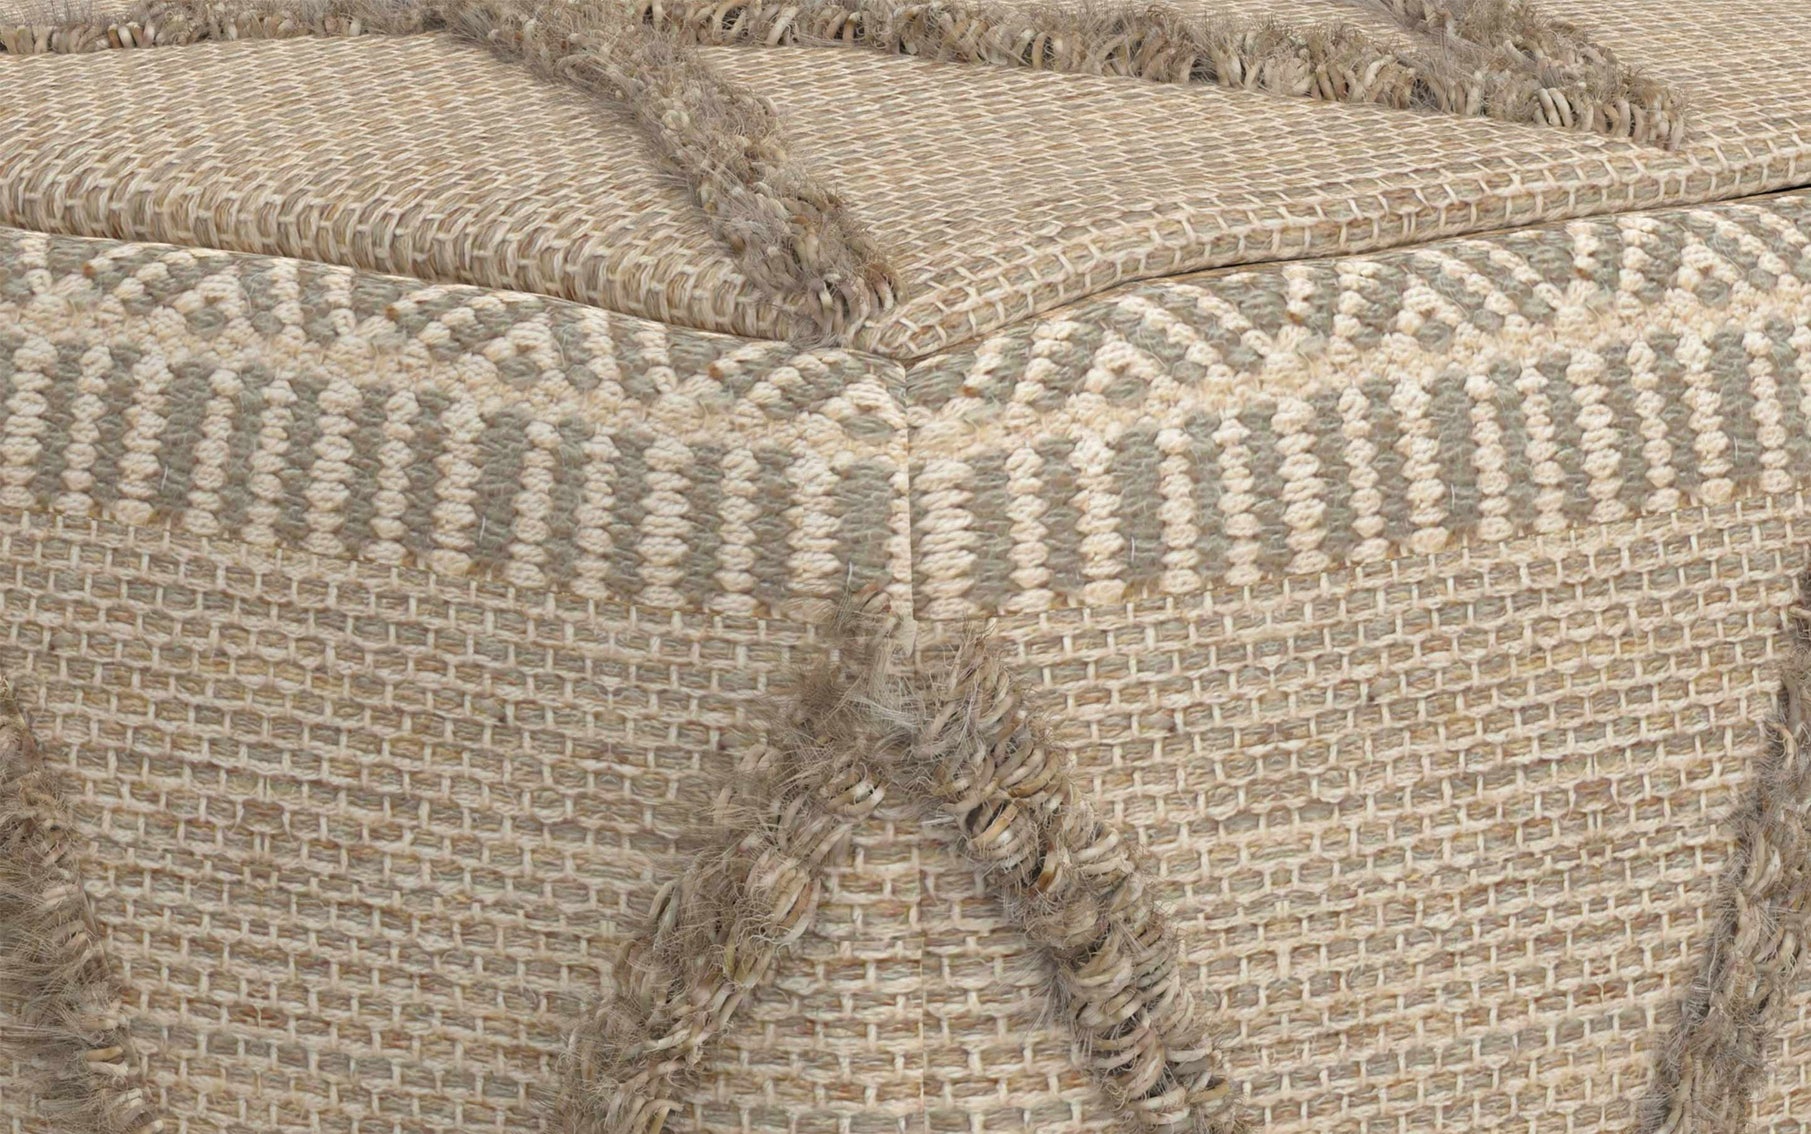 Brown Woven Wool | Sweeney Square Pouf